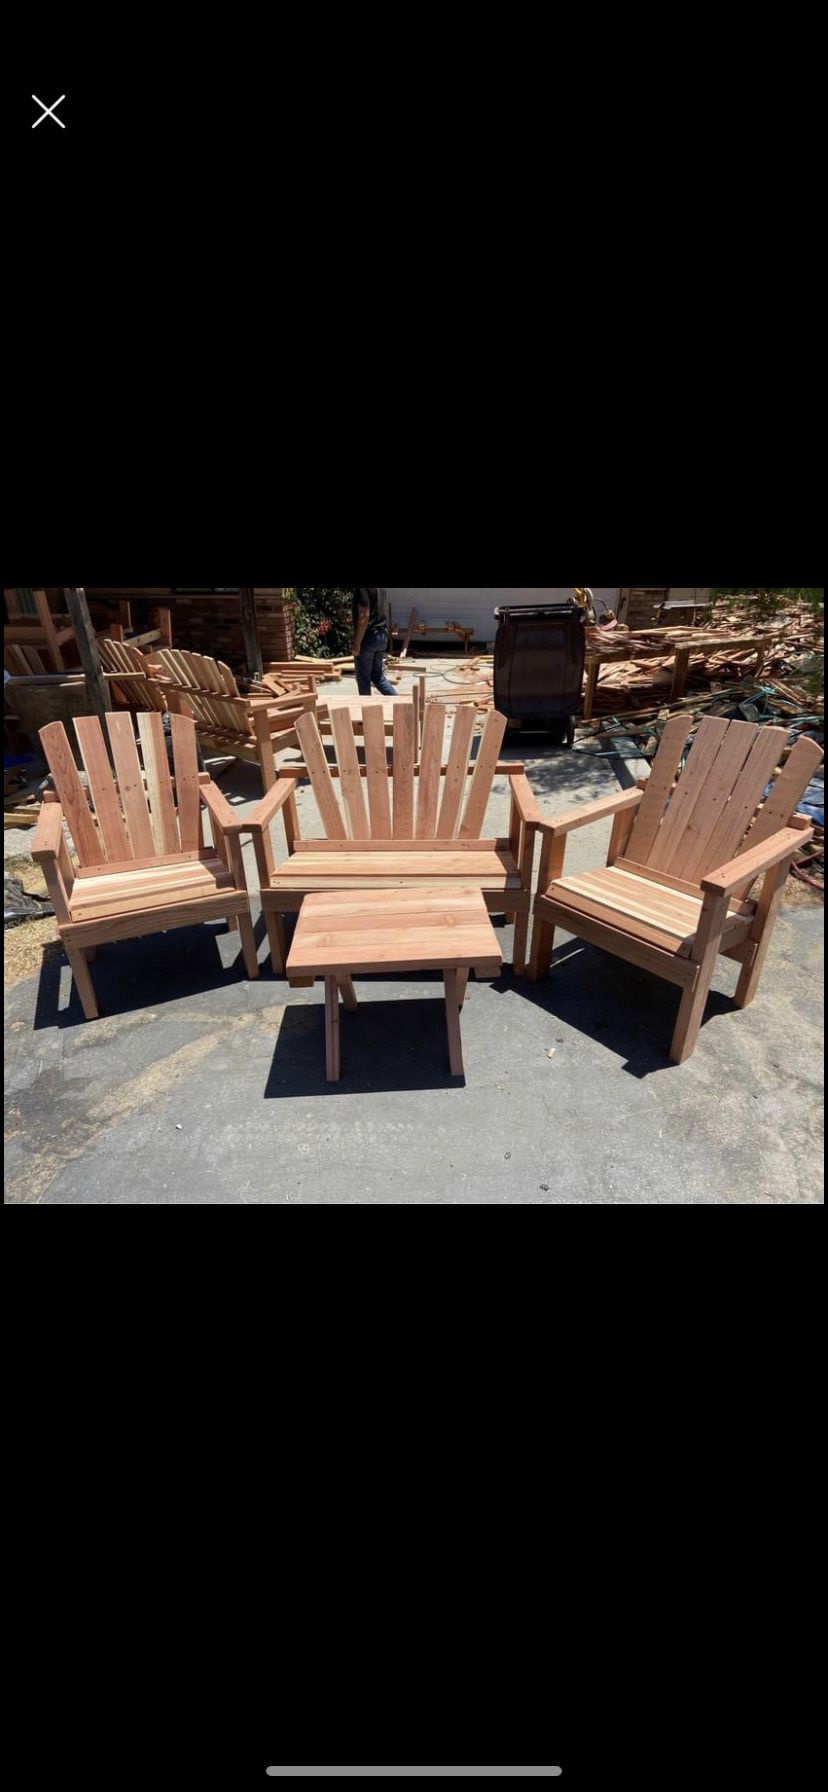 4 Piece Set Of Redwood Outdoor Furniture , 2 Arm Chairs ,1 Loveseat/bench 1 serving Table , Made Of Redwood , sanded To Smooth Finish ..